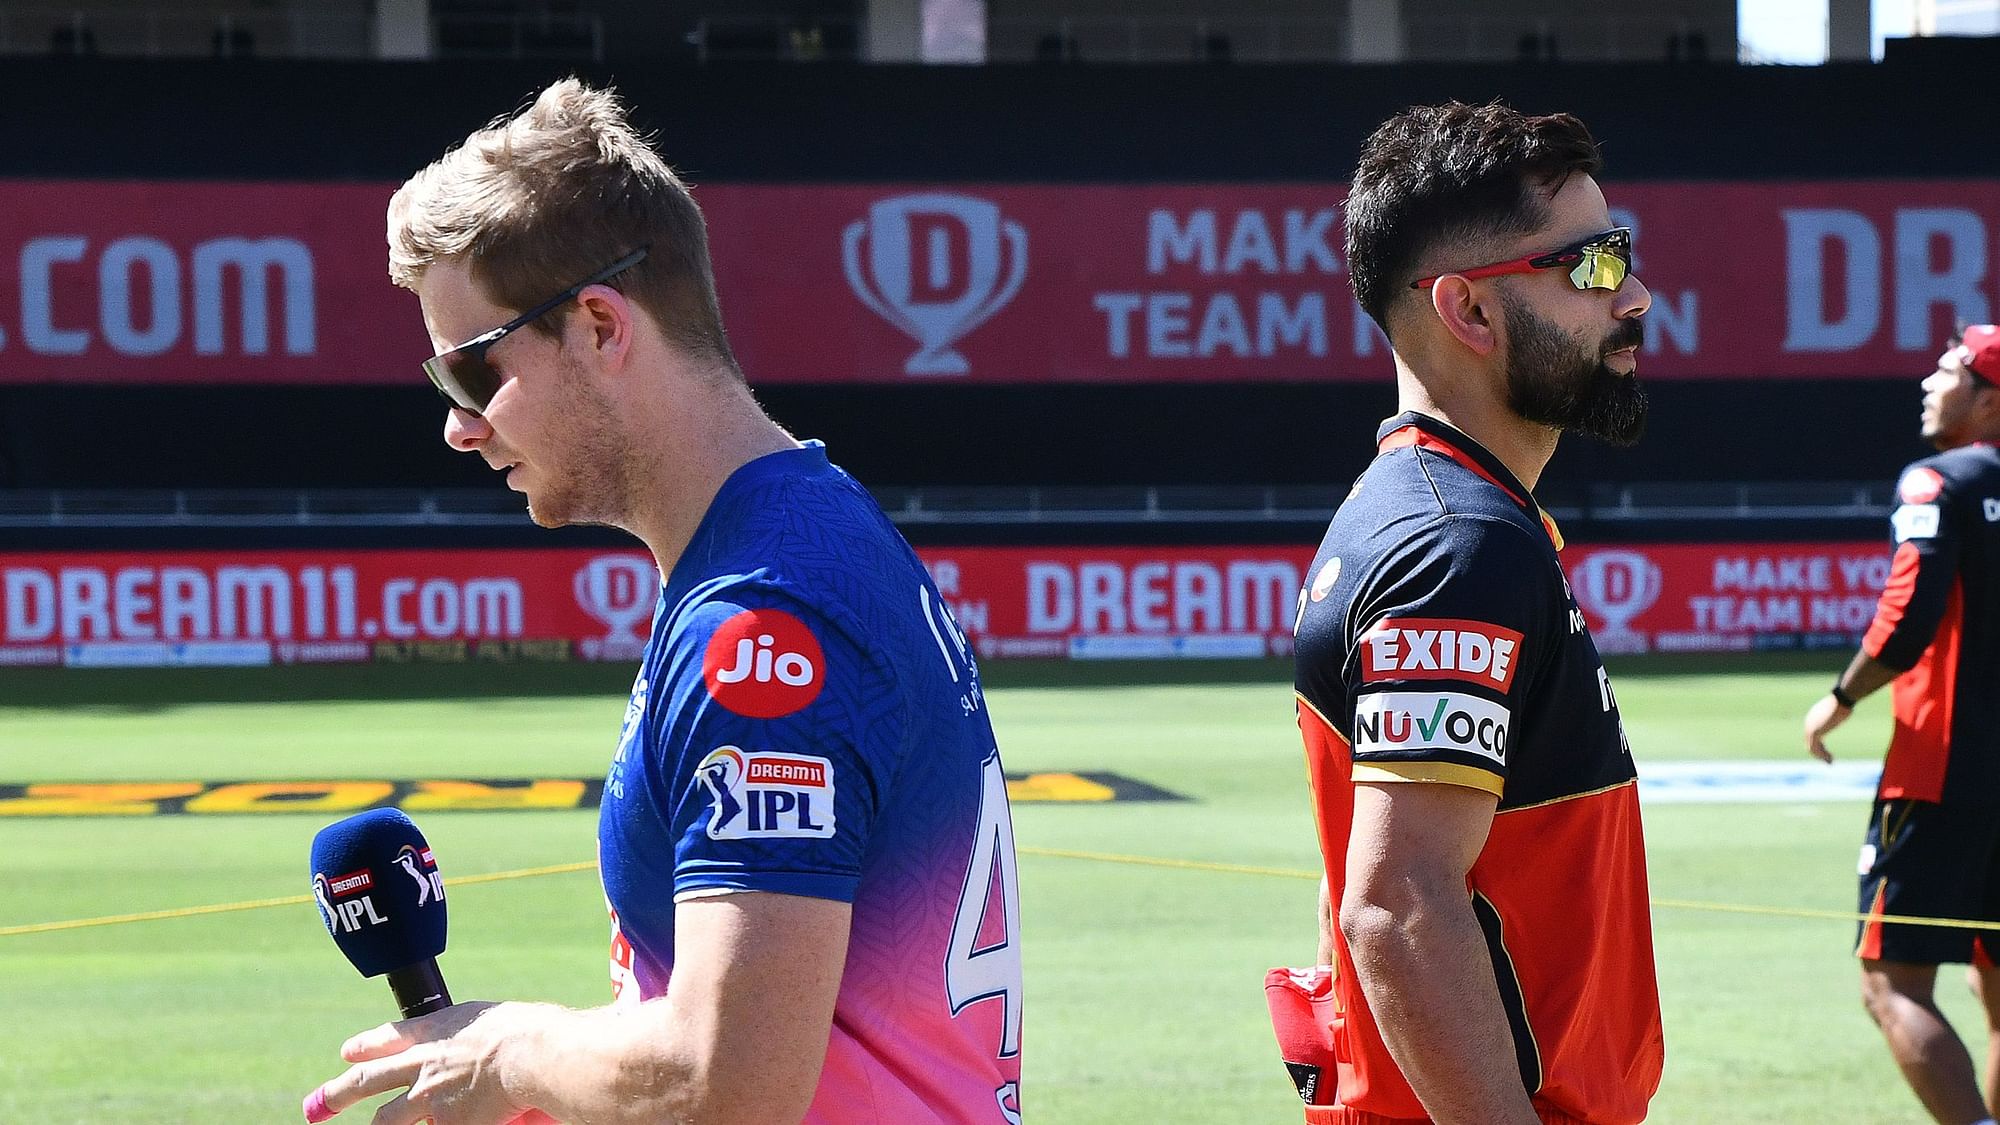 Steve Smith’s RR have won the toss and elected to bat first in Dubai vs RCB.